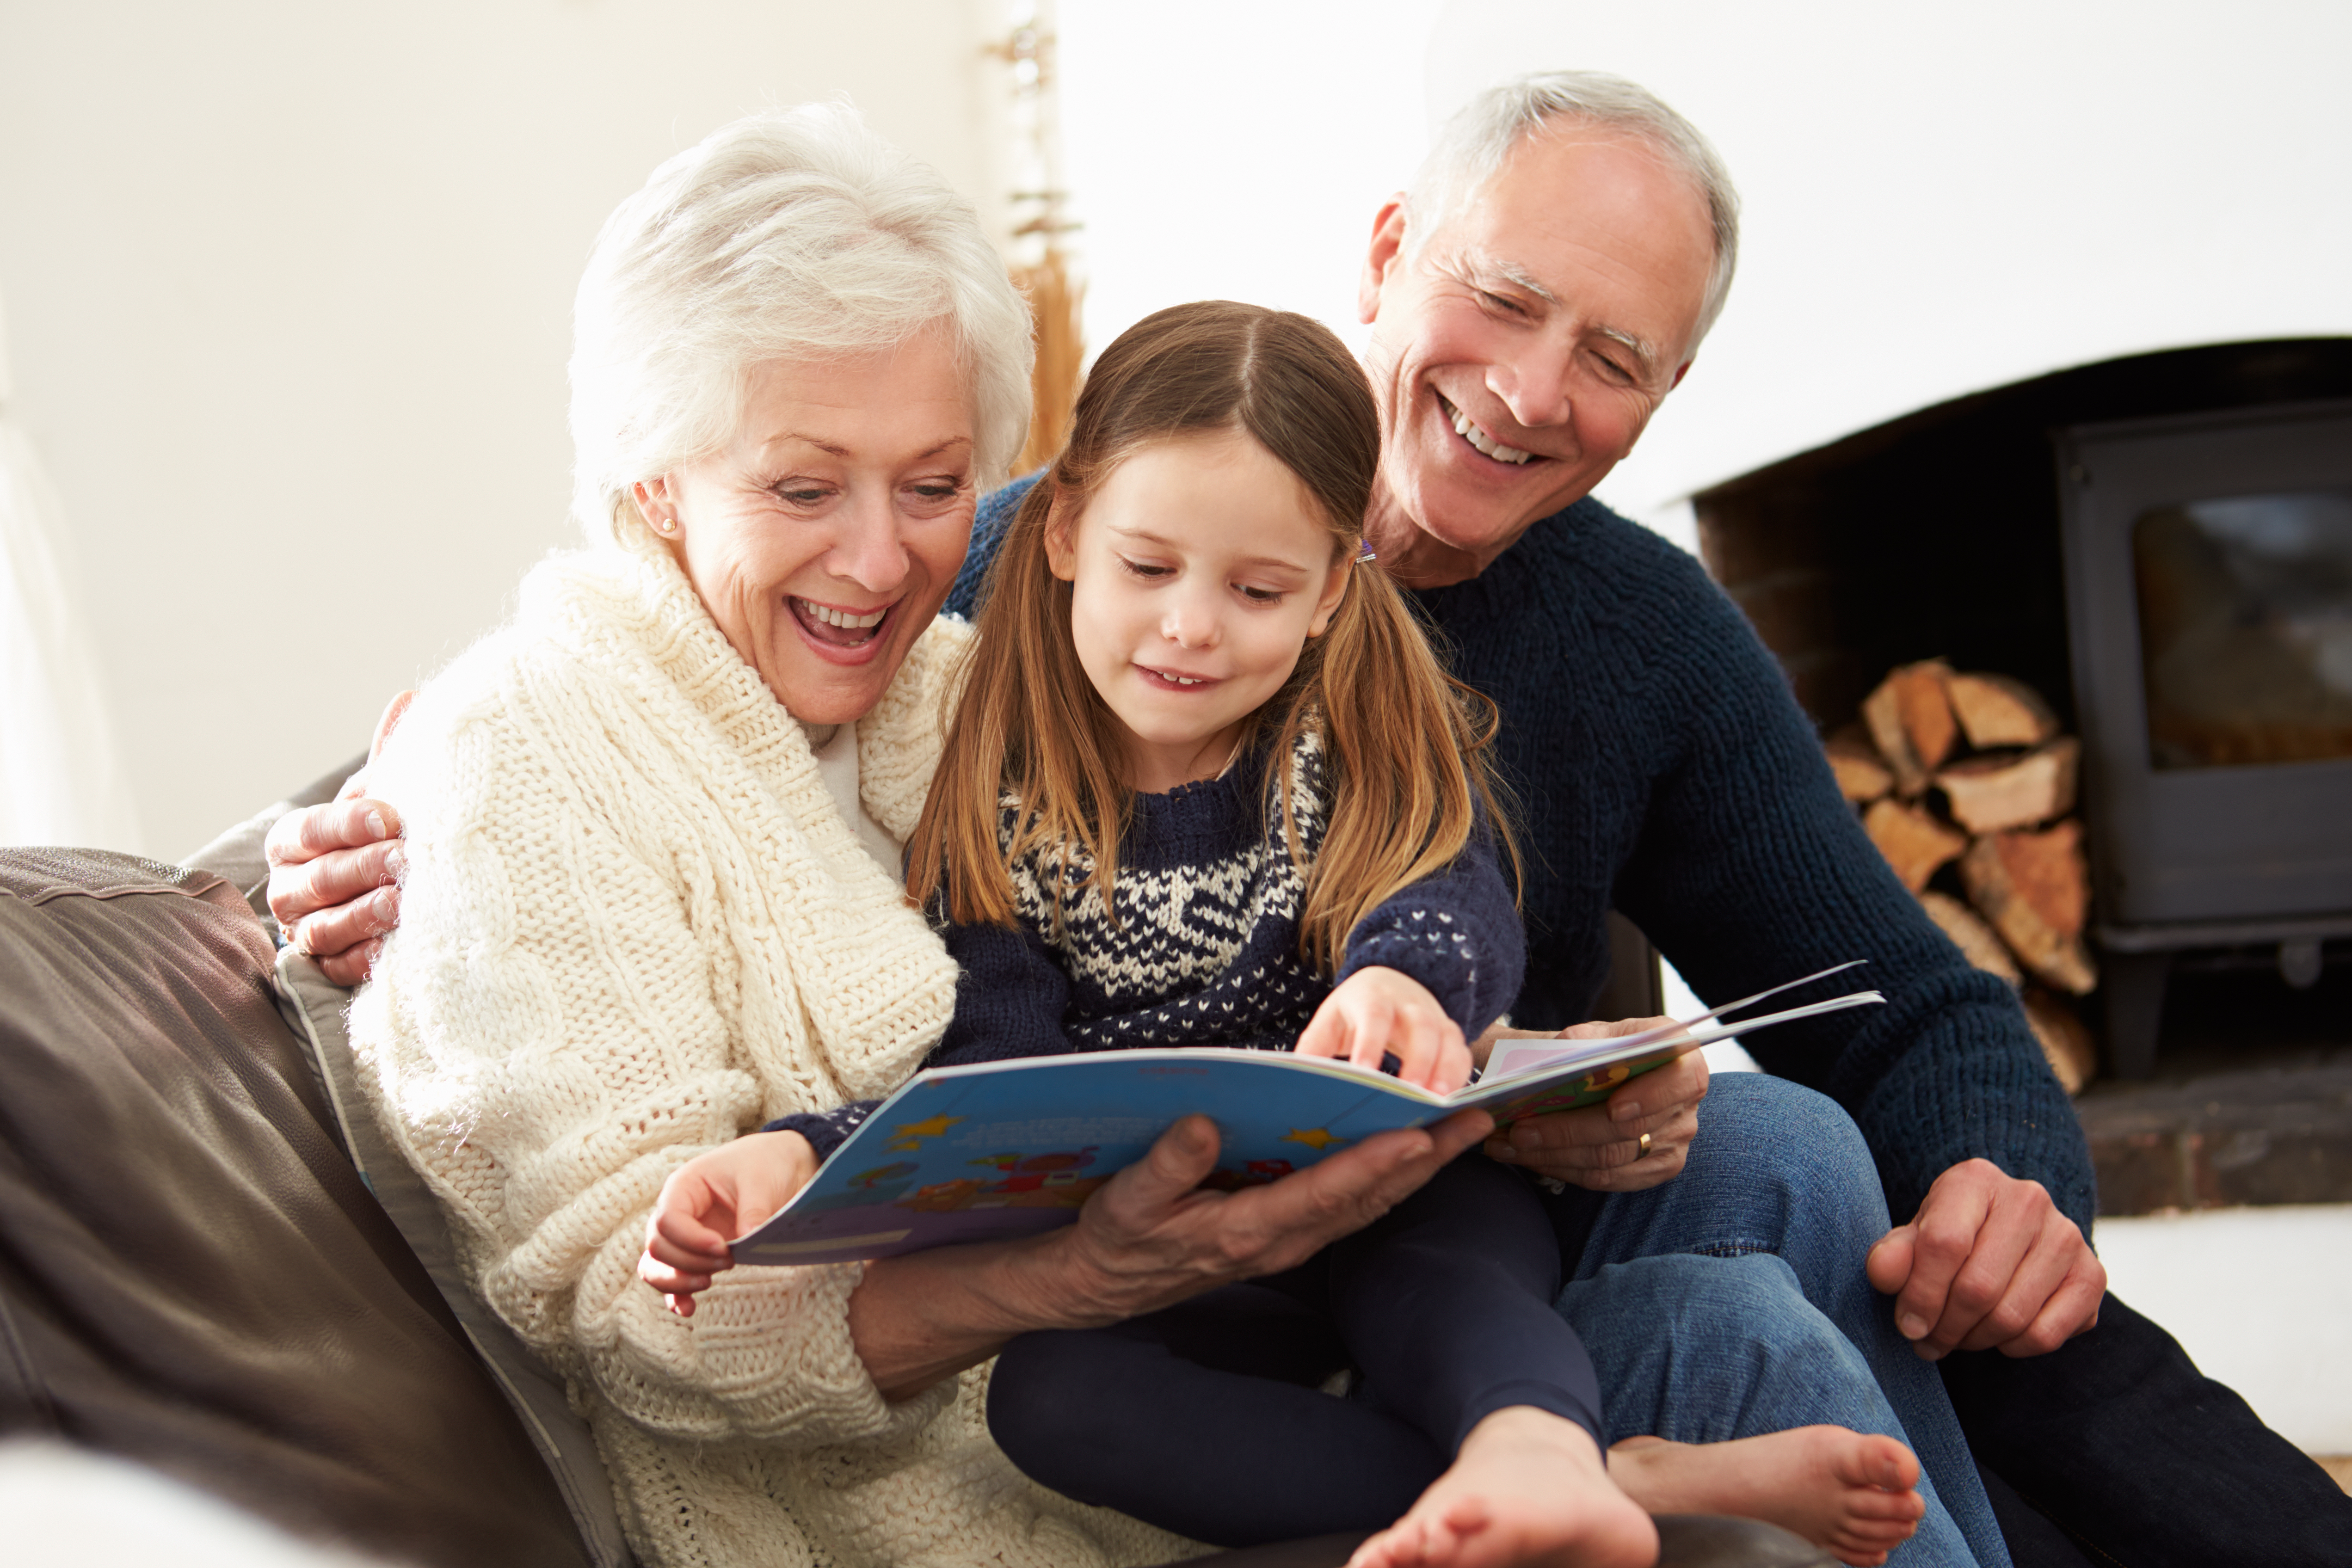 Grandparents and granddaughter reading a book together | Source: Shutterstock